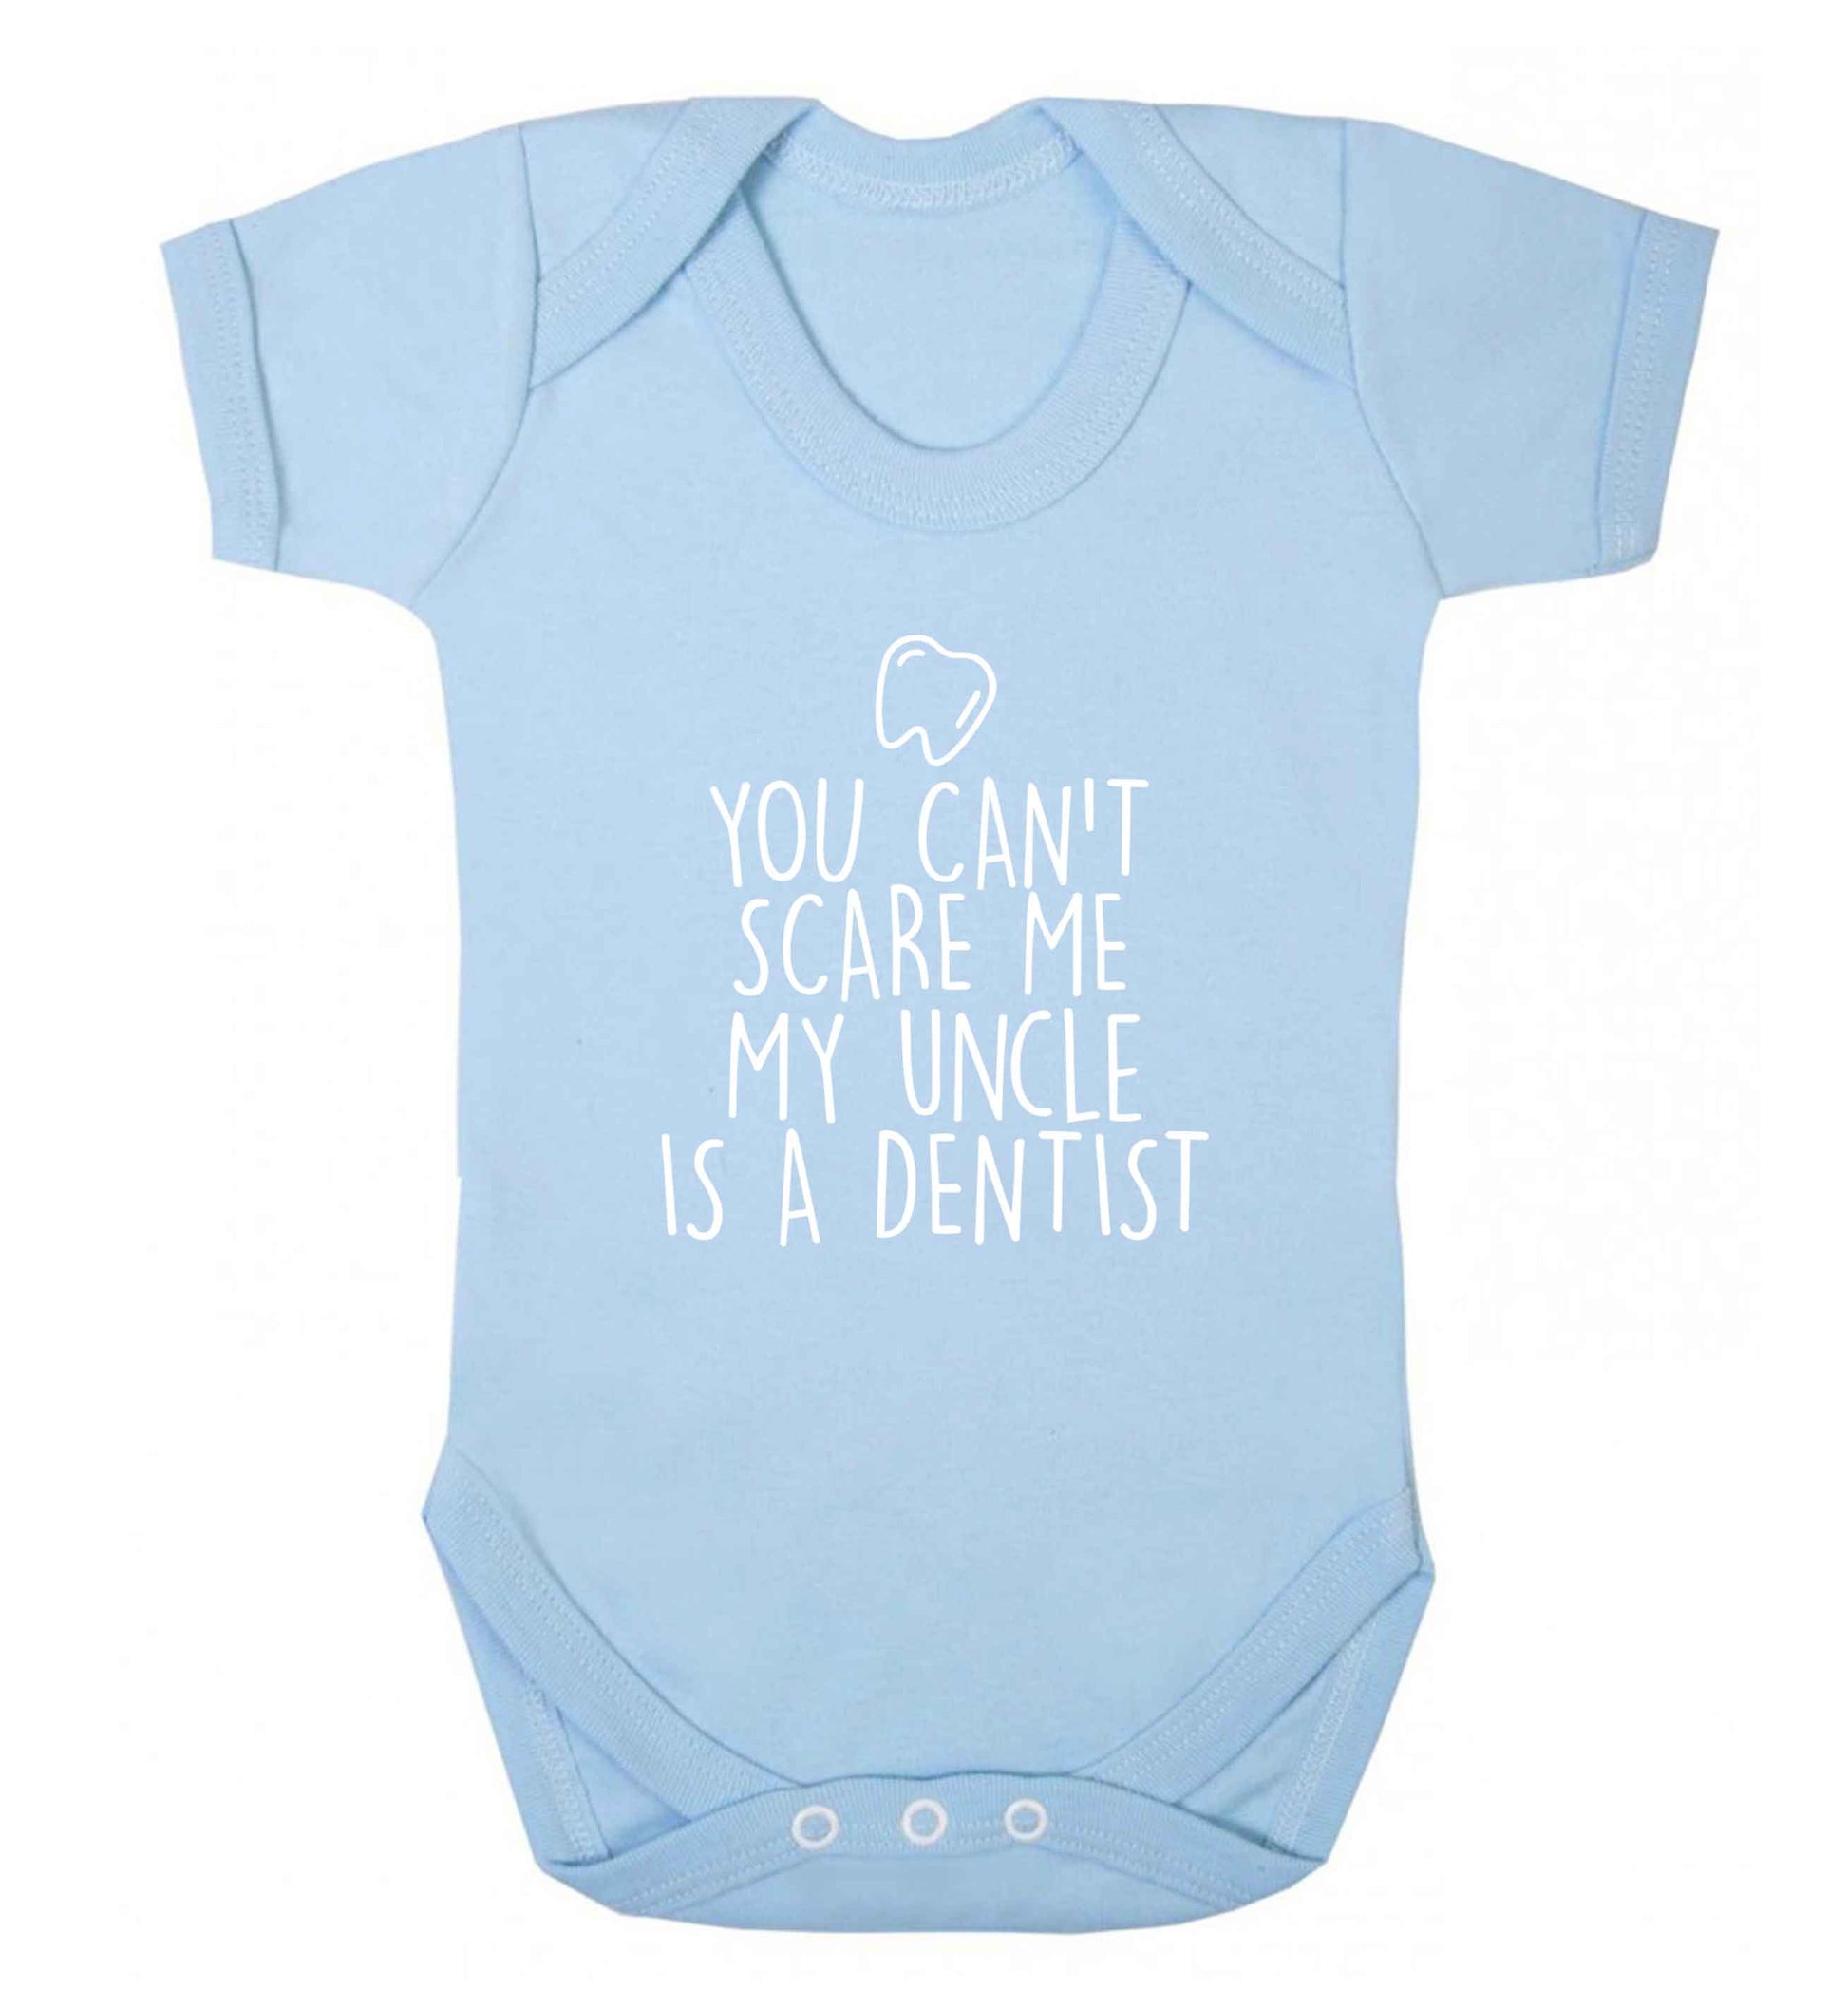 You can't scare me my uncle is a dentist baby vest pale blue 18-24 months